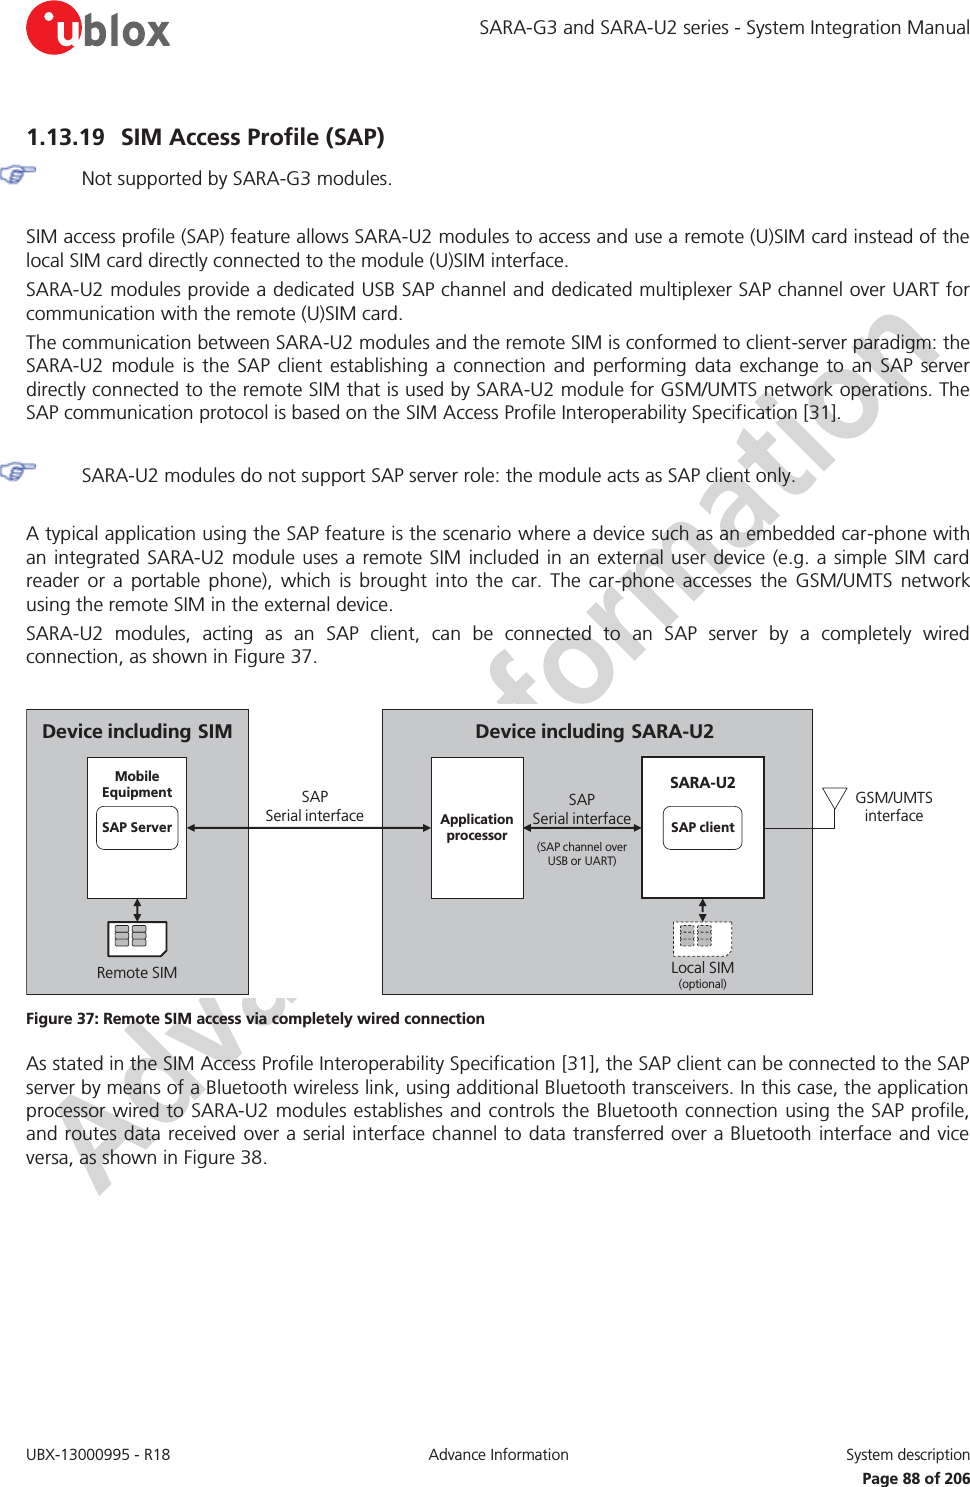 SARA-G3 and SARA-U2 series - System Integration Manual UBX-13000995 - R18  Advance Information  System description   Page 88 of 206 1.13.19 SIM Access Profile (SAP)  Not supported by SARA-G3 modules.  SIM access profile (SAP) feature allows SARA-U2 modules to access and use a remote (U)SIM card instead of the local SIM card directly connected to the module (U)SIM interface. SARA-U2 modules provide a dedicated USB SAP channel and dedicated multiplexer SAP channel over UART for communication with the remote (U)SIM card. The communication between SARA-U2 modules and the remote SIM is conformed to client-server paradigm: the SARA-U2 module is the SAP client establishing a connection and performing data exchange to an SAP server directly connected to the remote SIM that is used by SARA-U2 module for GSM/UMTS network operations. The SAP communication protocol is based on the SIM Access Profile Interoperability Specification [31].   SARA-U2 modules do not support SAP server role: the module acts as SAP client only.  A typical application using the SAP feature is the scenario where a device such as an embedded car-phone with an integrated SARA-U2 module uses a remote SIM included in an external user device (e.g. a simple SIM card reader or a portable phone), which is brought into the car. The car-phone accesses the GSM/UMTS network using the remote SIM in the external device. SARA-U2 modules, acting as an SAP client, can be connected to an SAP server by a completely wired connection, as shown in Figure 37.  Device including SARA-U2 GSM/UMTS interfaceSAP             Serial interface(SAP channel over USB or UART)Local SIM(optional)SARA-U2SAP clientApplicationprocessorDevice including SIMSAP                   Serial interfaceRemote SIMMobileEquipmentSAP Server Figure 37: Remote SIM access via completely wired connection As stated in the SIM Access Profile Interoperability Specification [31], the SAP client can be connected to the SAP server by means of a Bluetooth wireless link, using additional Bluetooth transceivers. In this case, the application processor wired to SARA-U2 modules establishes and controls the Bluetooth connection using the SAP profile, and routes data received over a serial interface channel to data transferred over a Bluetooth interface and vice versa, as shown in Figure 38.  